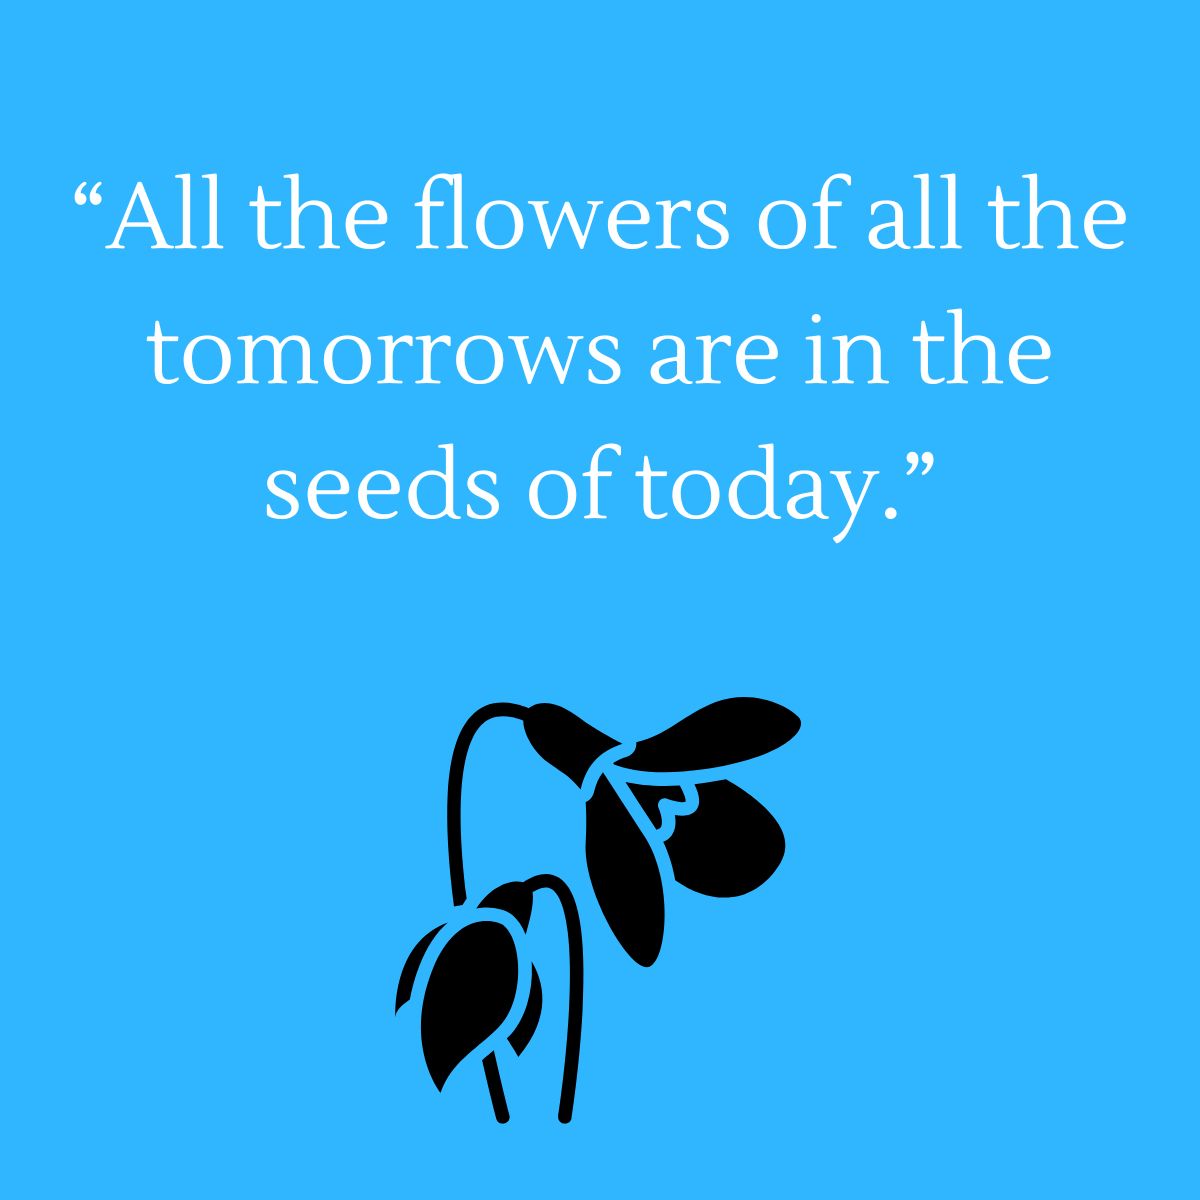 All the flowers of all the tomorrows are in the seeds of today